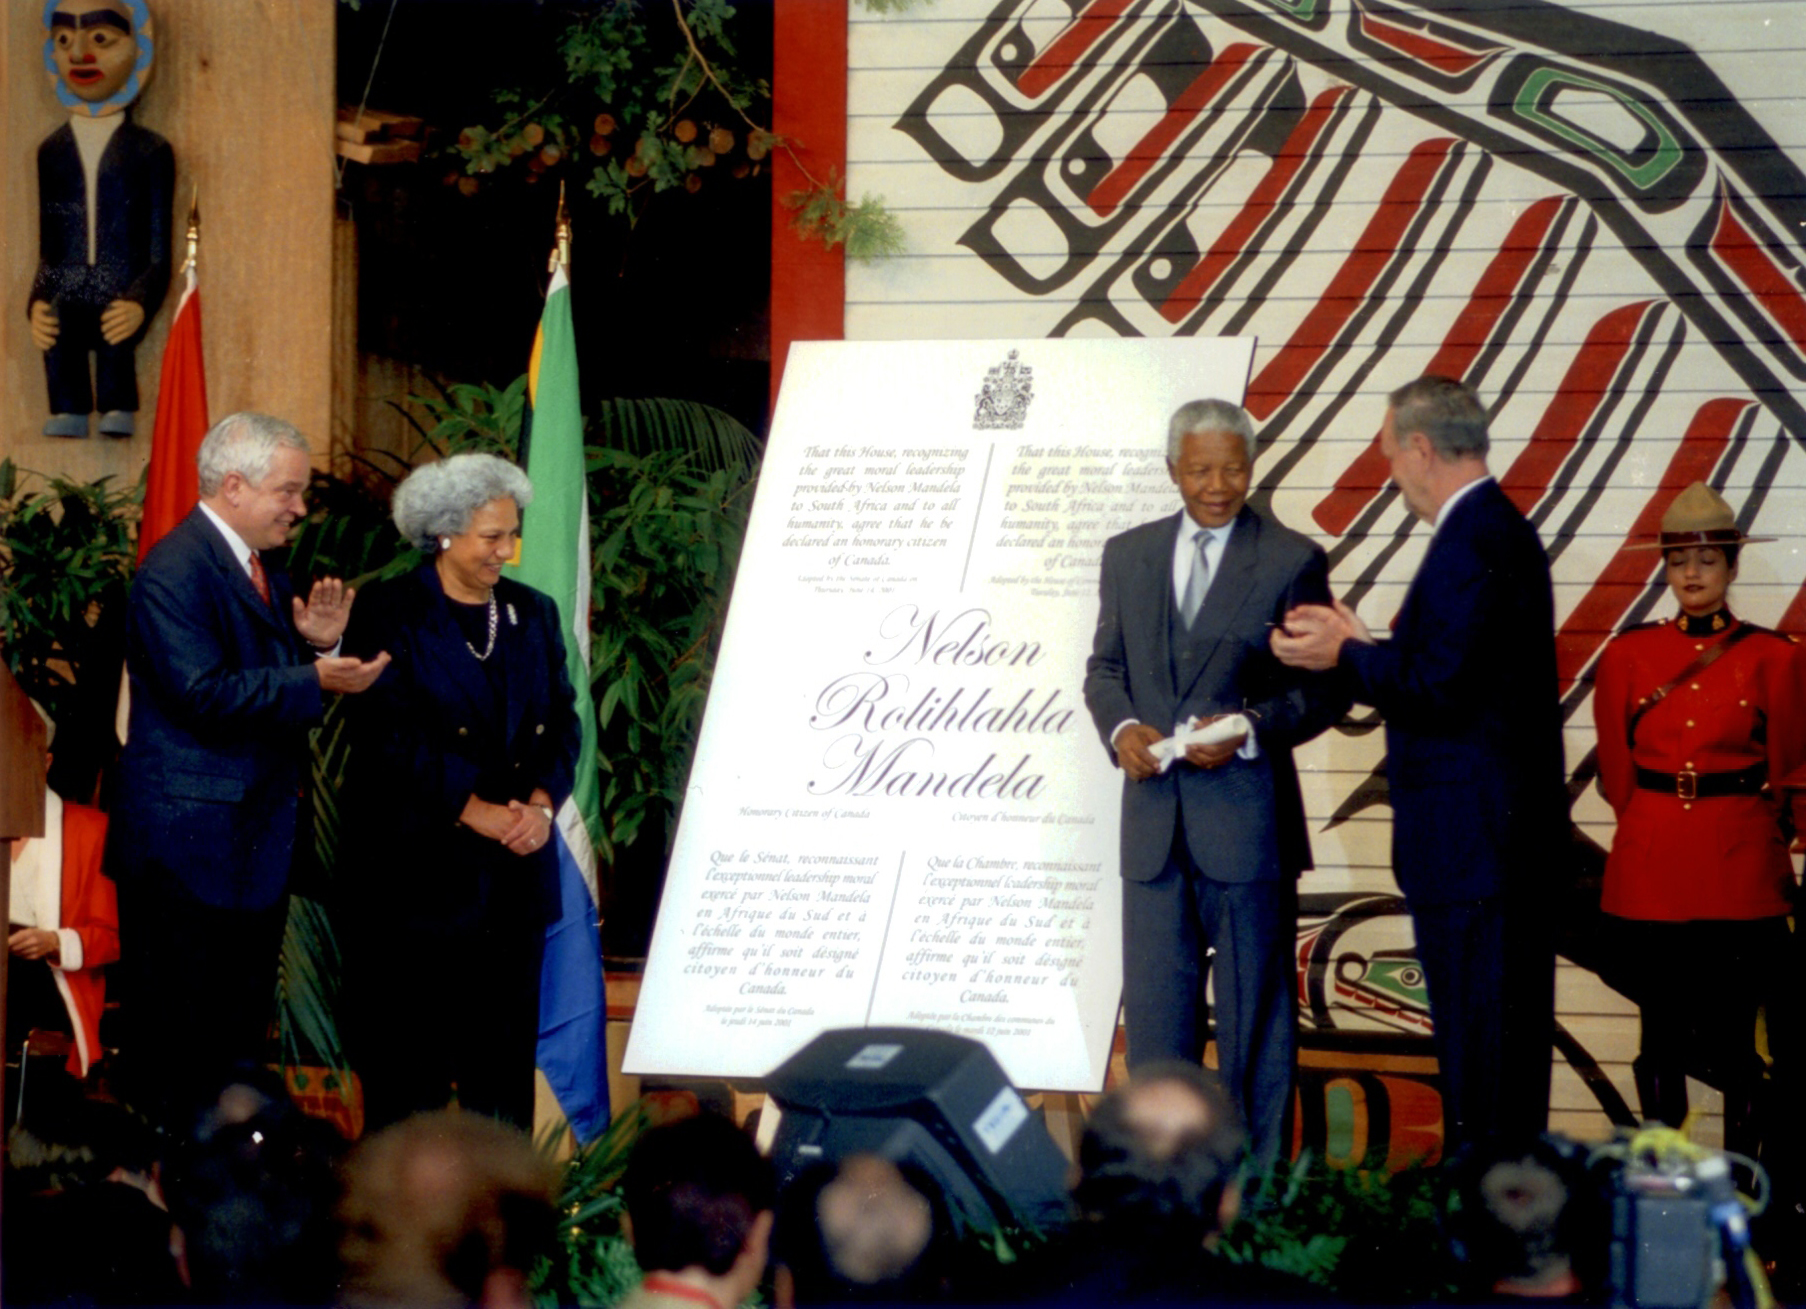 Senator Cools, with Member of Parliament John McCallum (far left) and Prime Minister Jean Chrétien (far right), bestows honorary Canadian citizenship on Nelson Mandela in 2001.